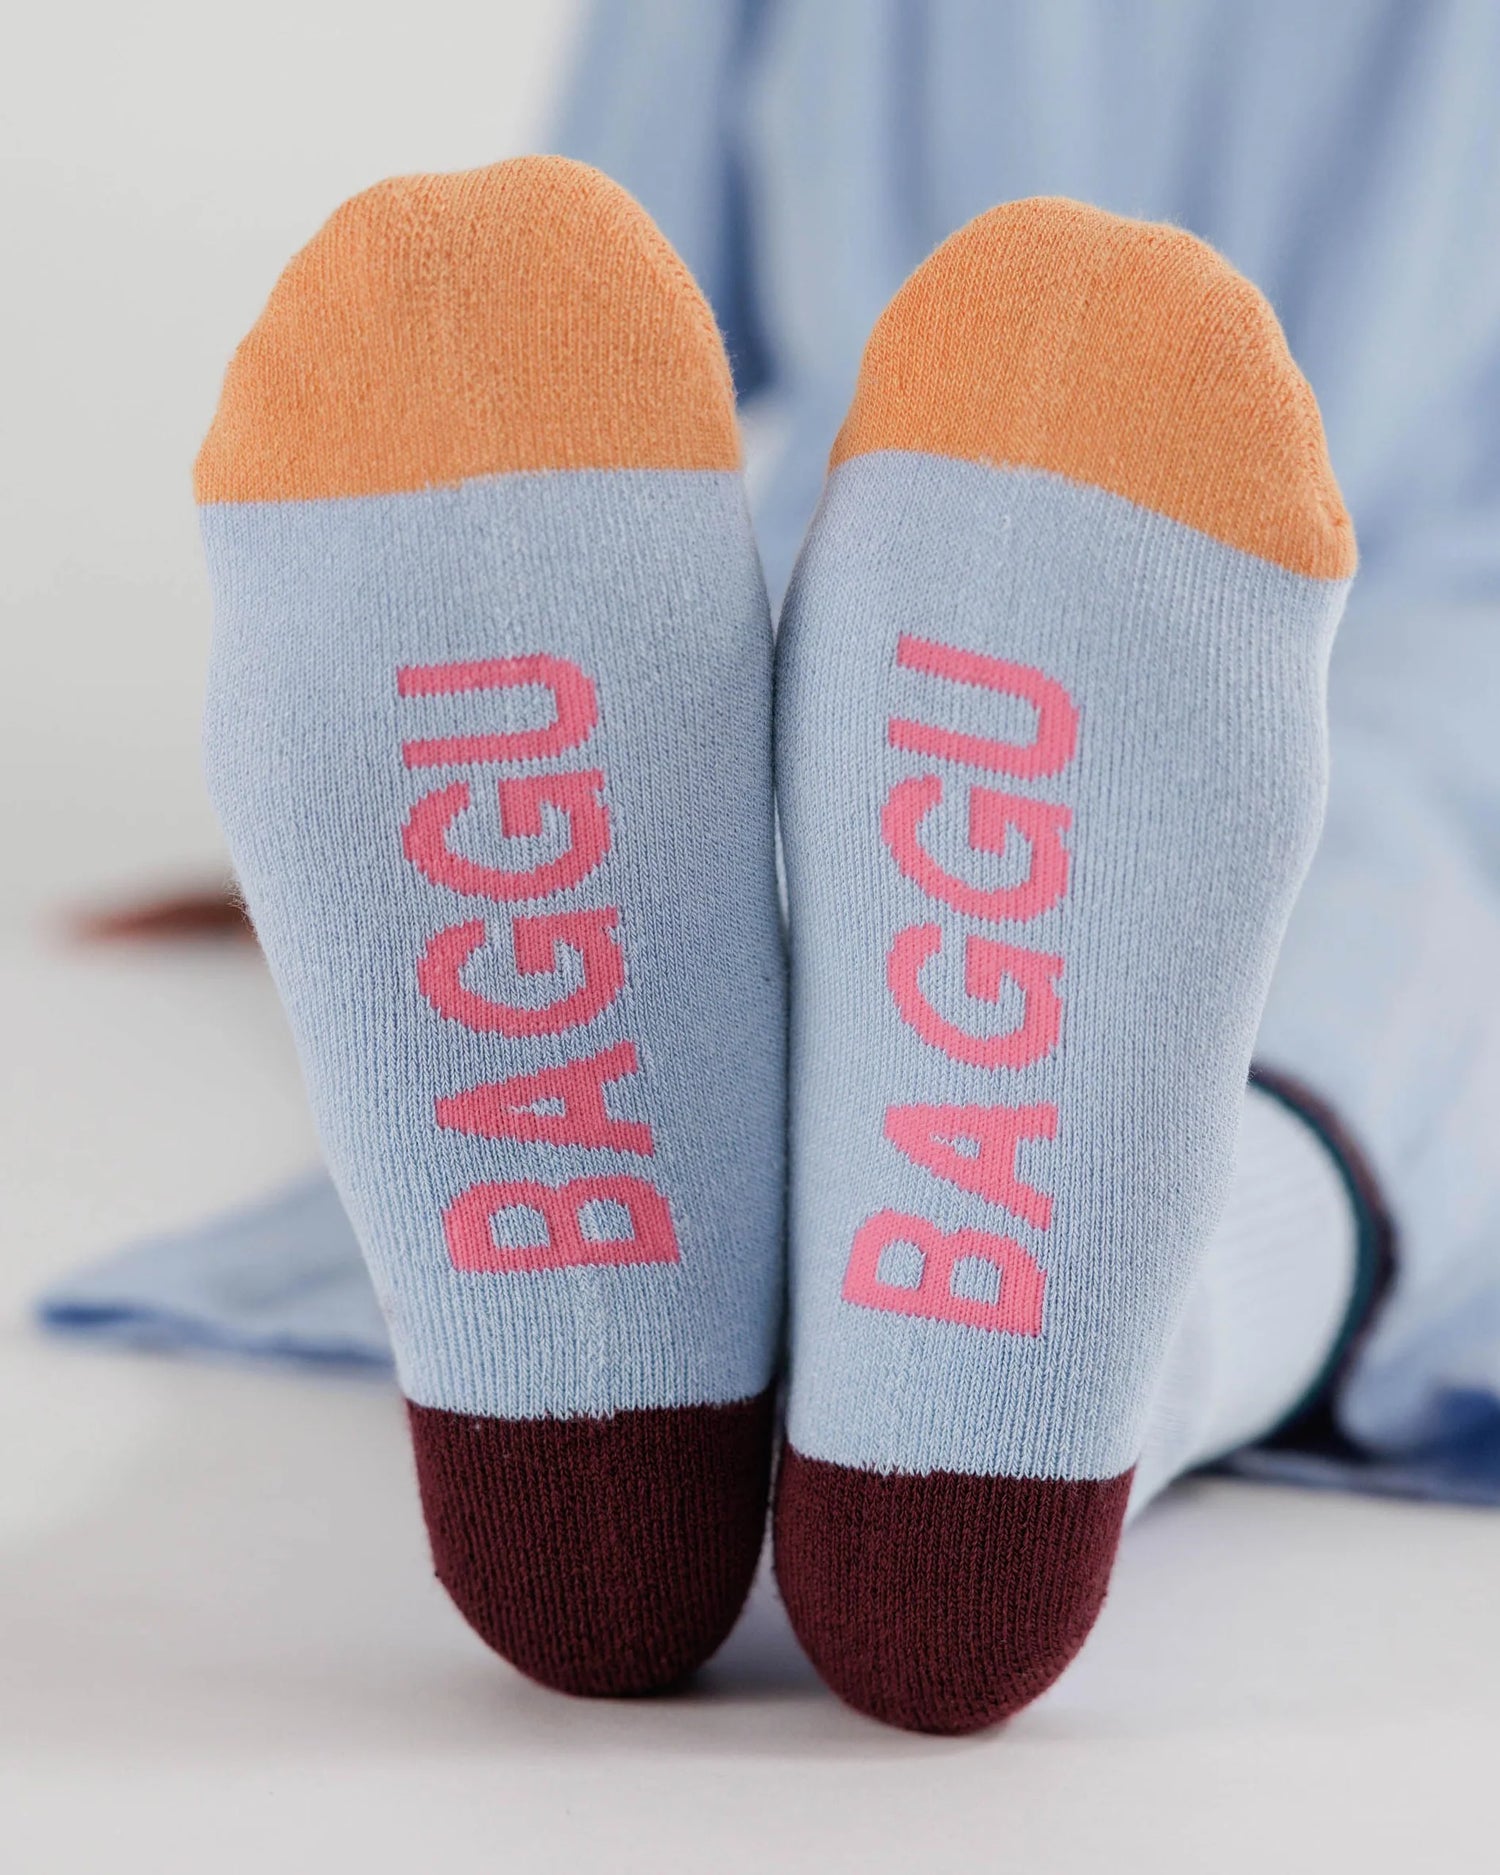 Light Blue Socks with black Ankle Stripe, Brown heel, orange colour blocked toes, and pink "BAGGU" text on bottom of feet